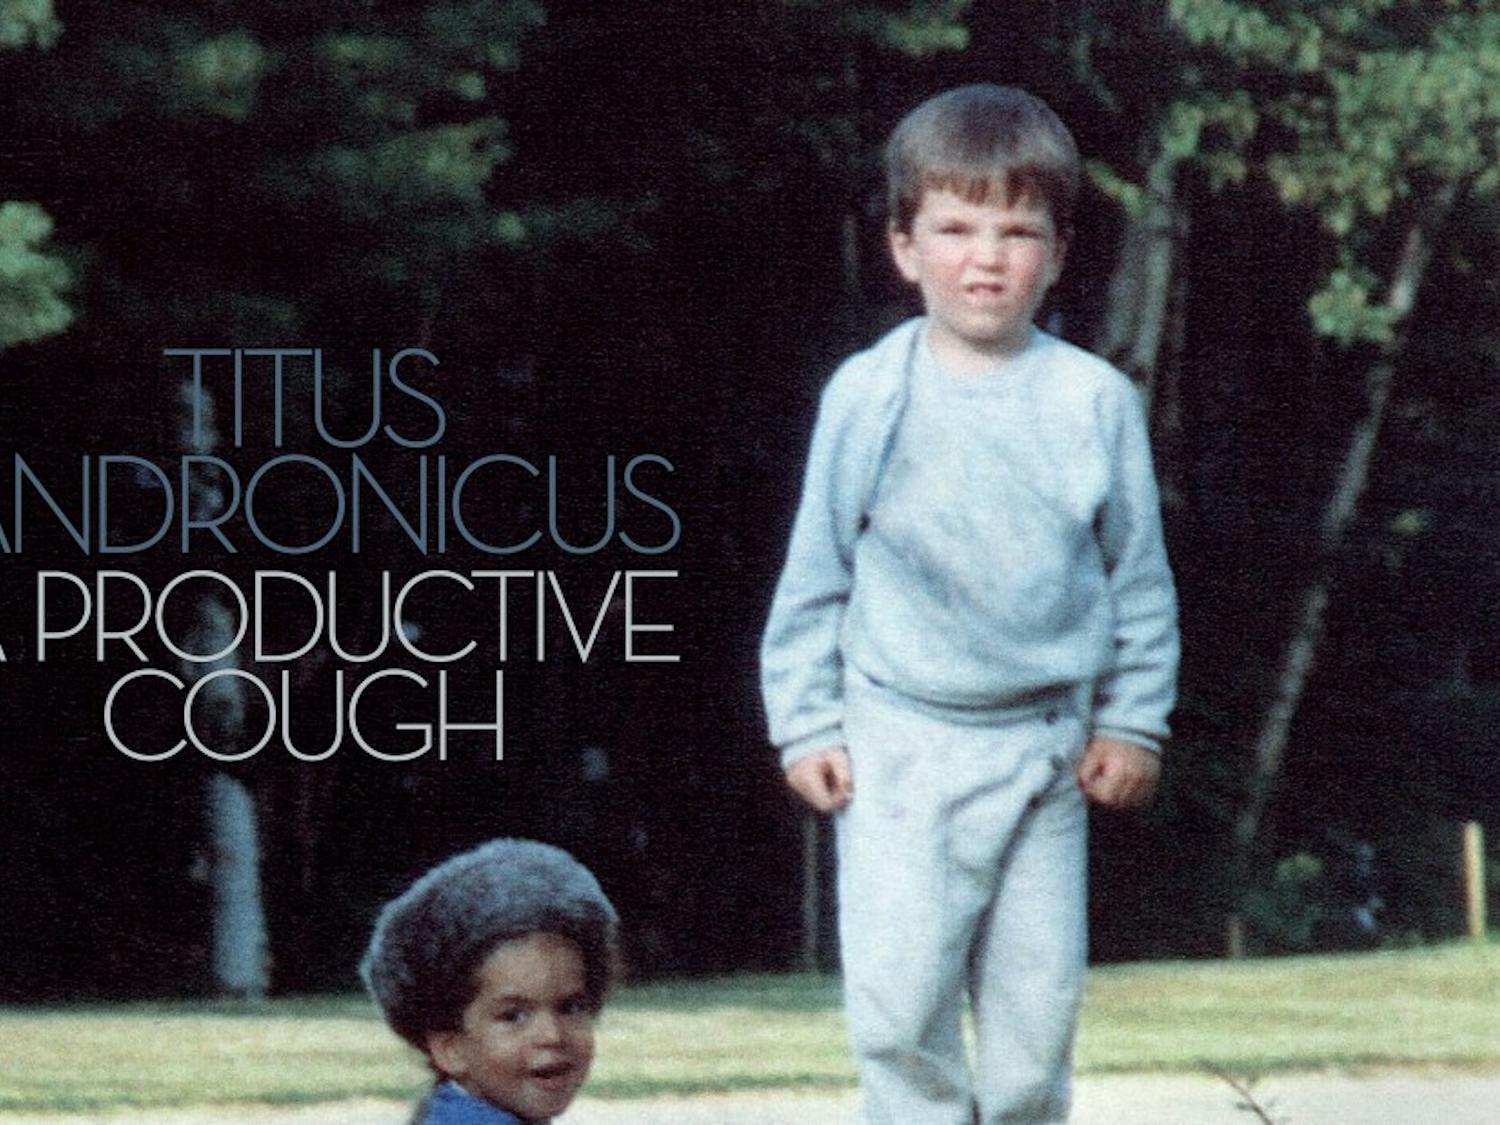 On Friday, Titus Andronicus releases "A Productive Cough," the follow-up to 2015's "The Most Lamentable Tragedy."